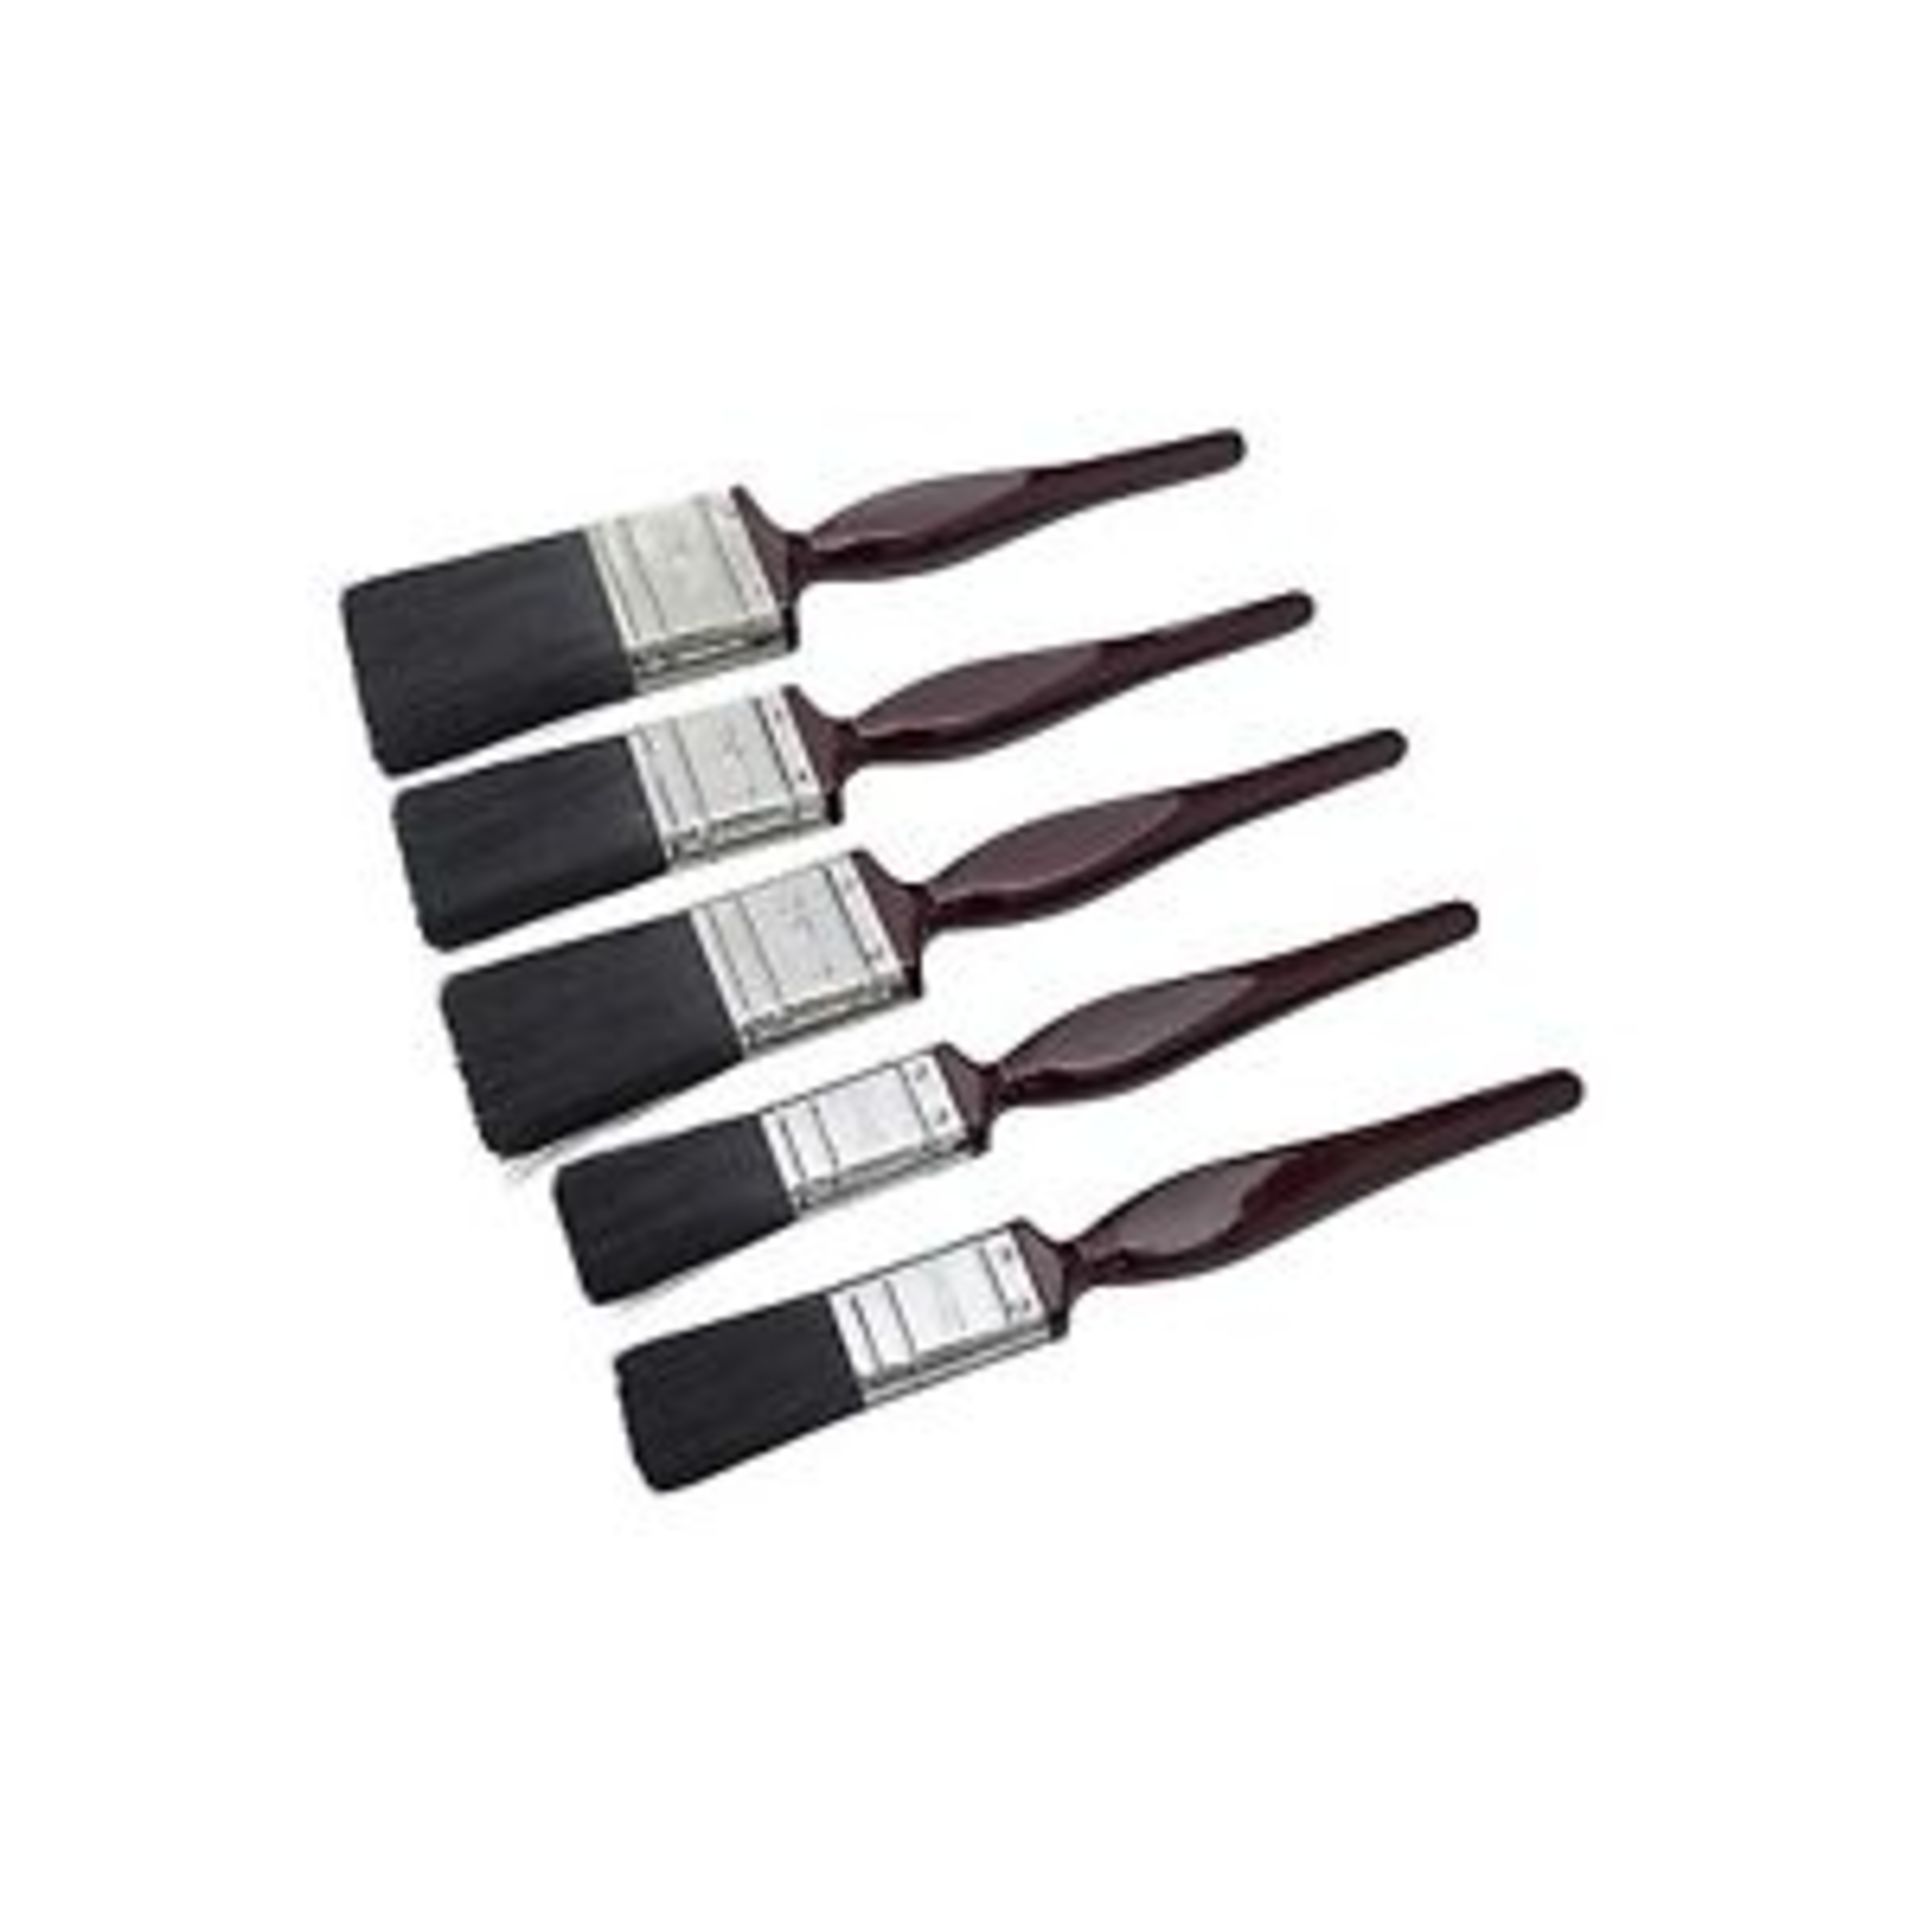 + VAT Brand New High Quality 5 Piece Synthetic No Loss Paint Brush Set Includes 2 x 25 mm, 2 x 38